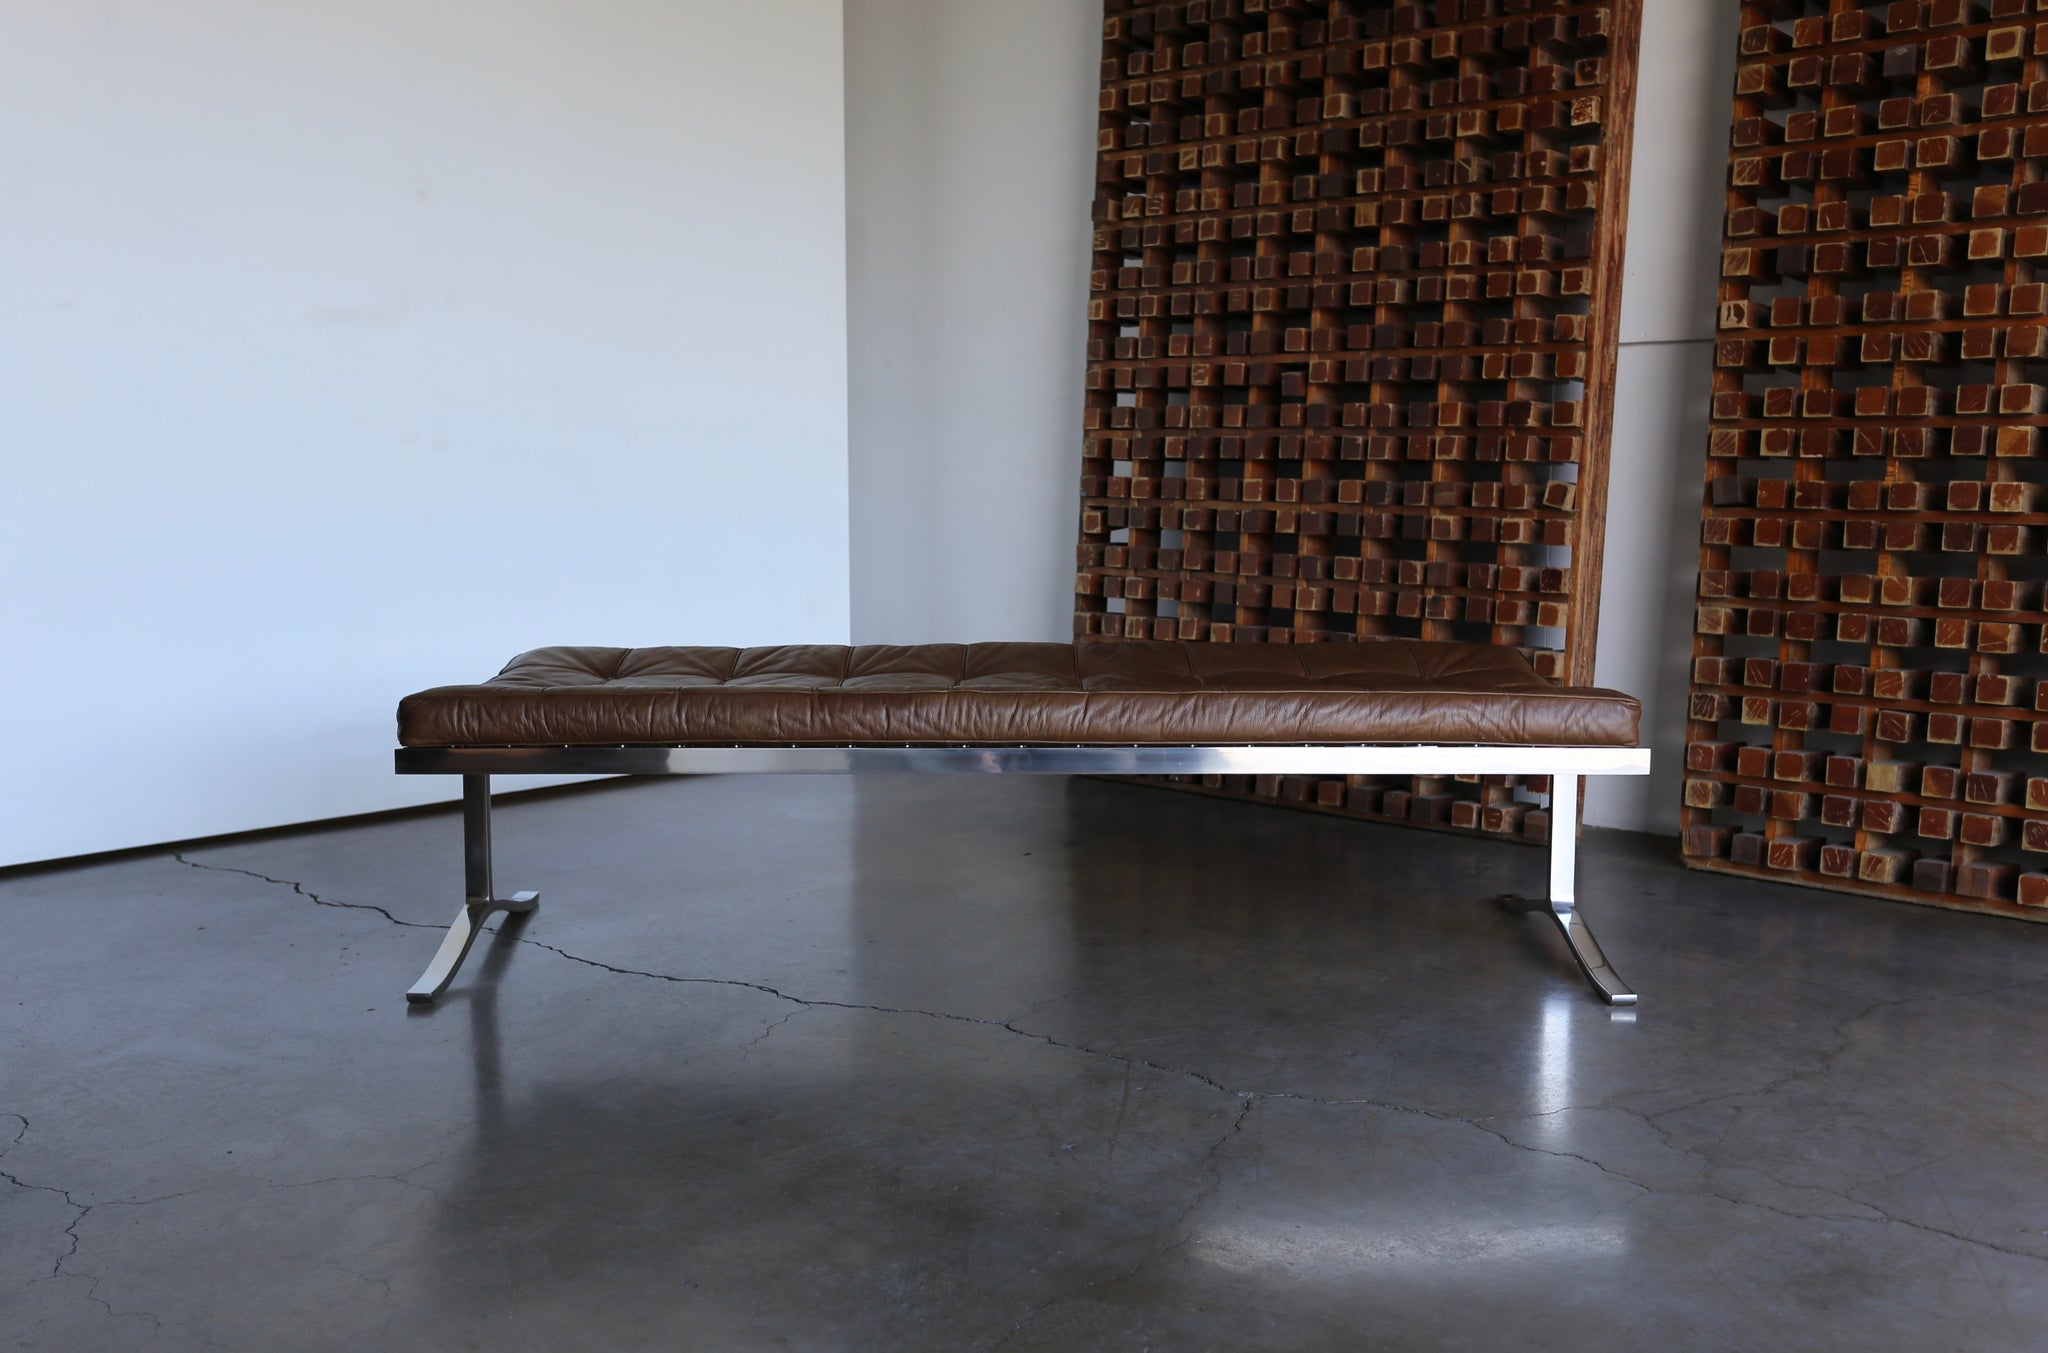 = SOLD = Nico Zographos Leather & Stainless Steel Bench circa 1975